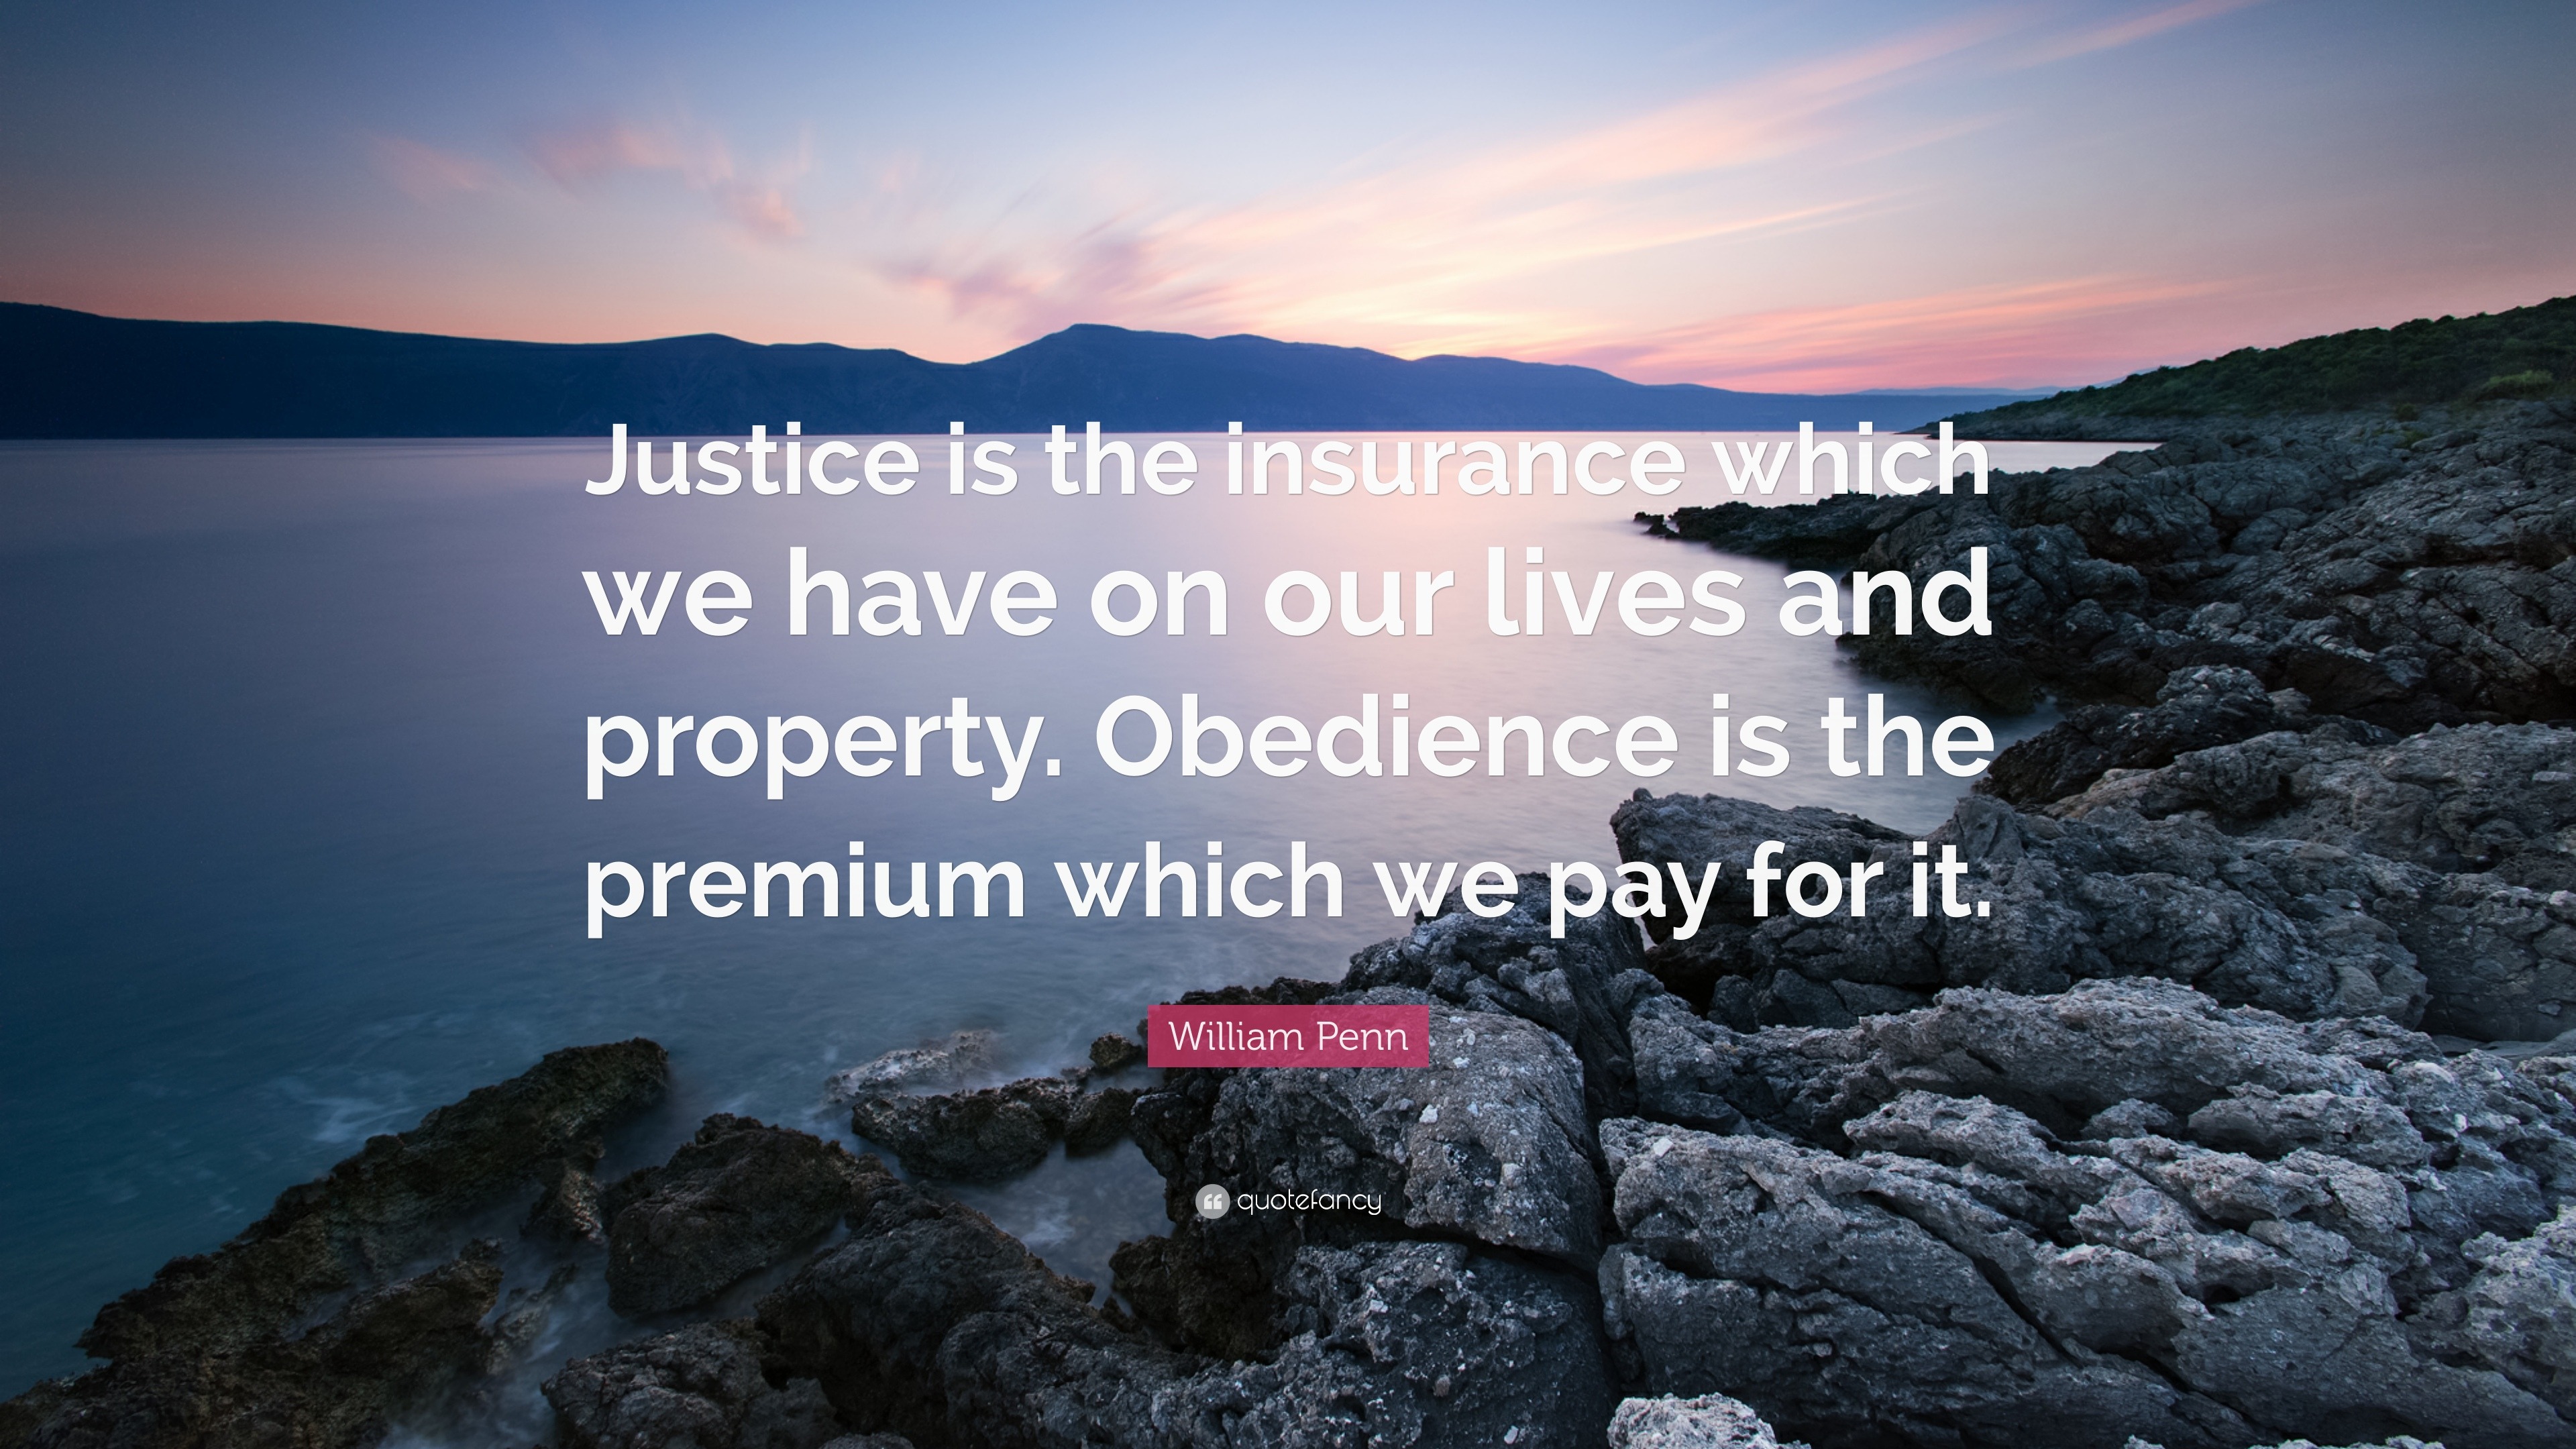 William Penn Quote “Justice is the insurance which we have on our lives and